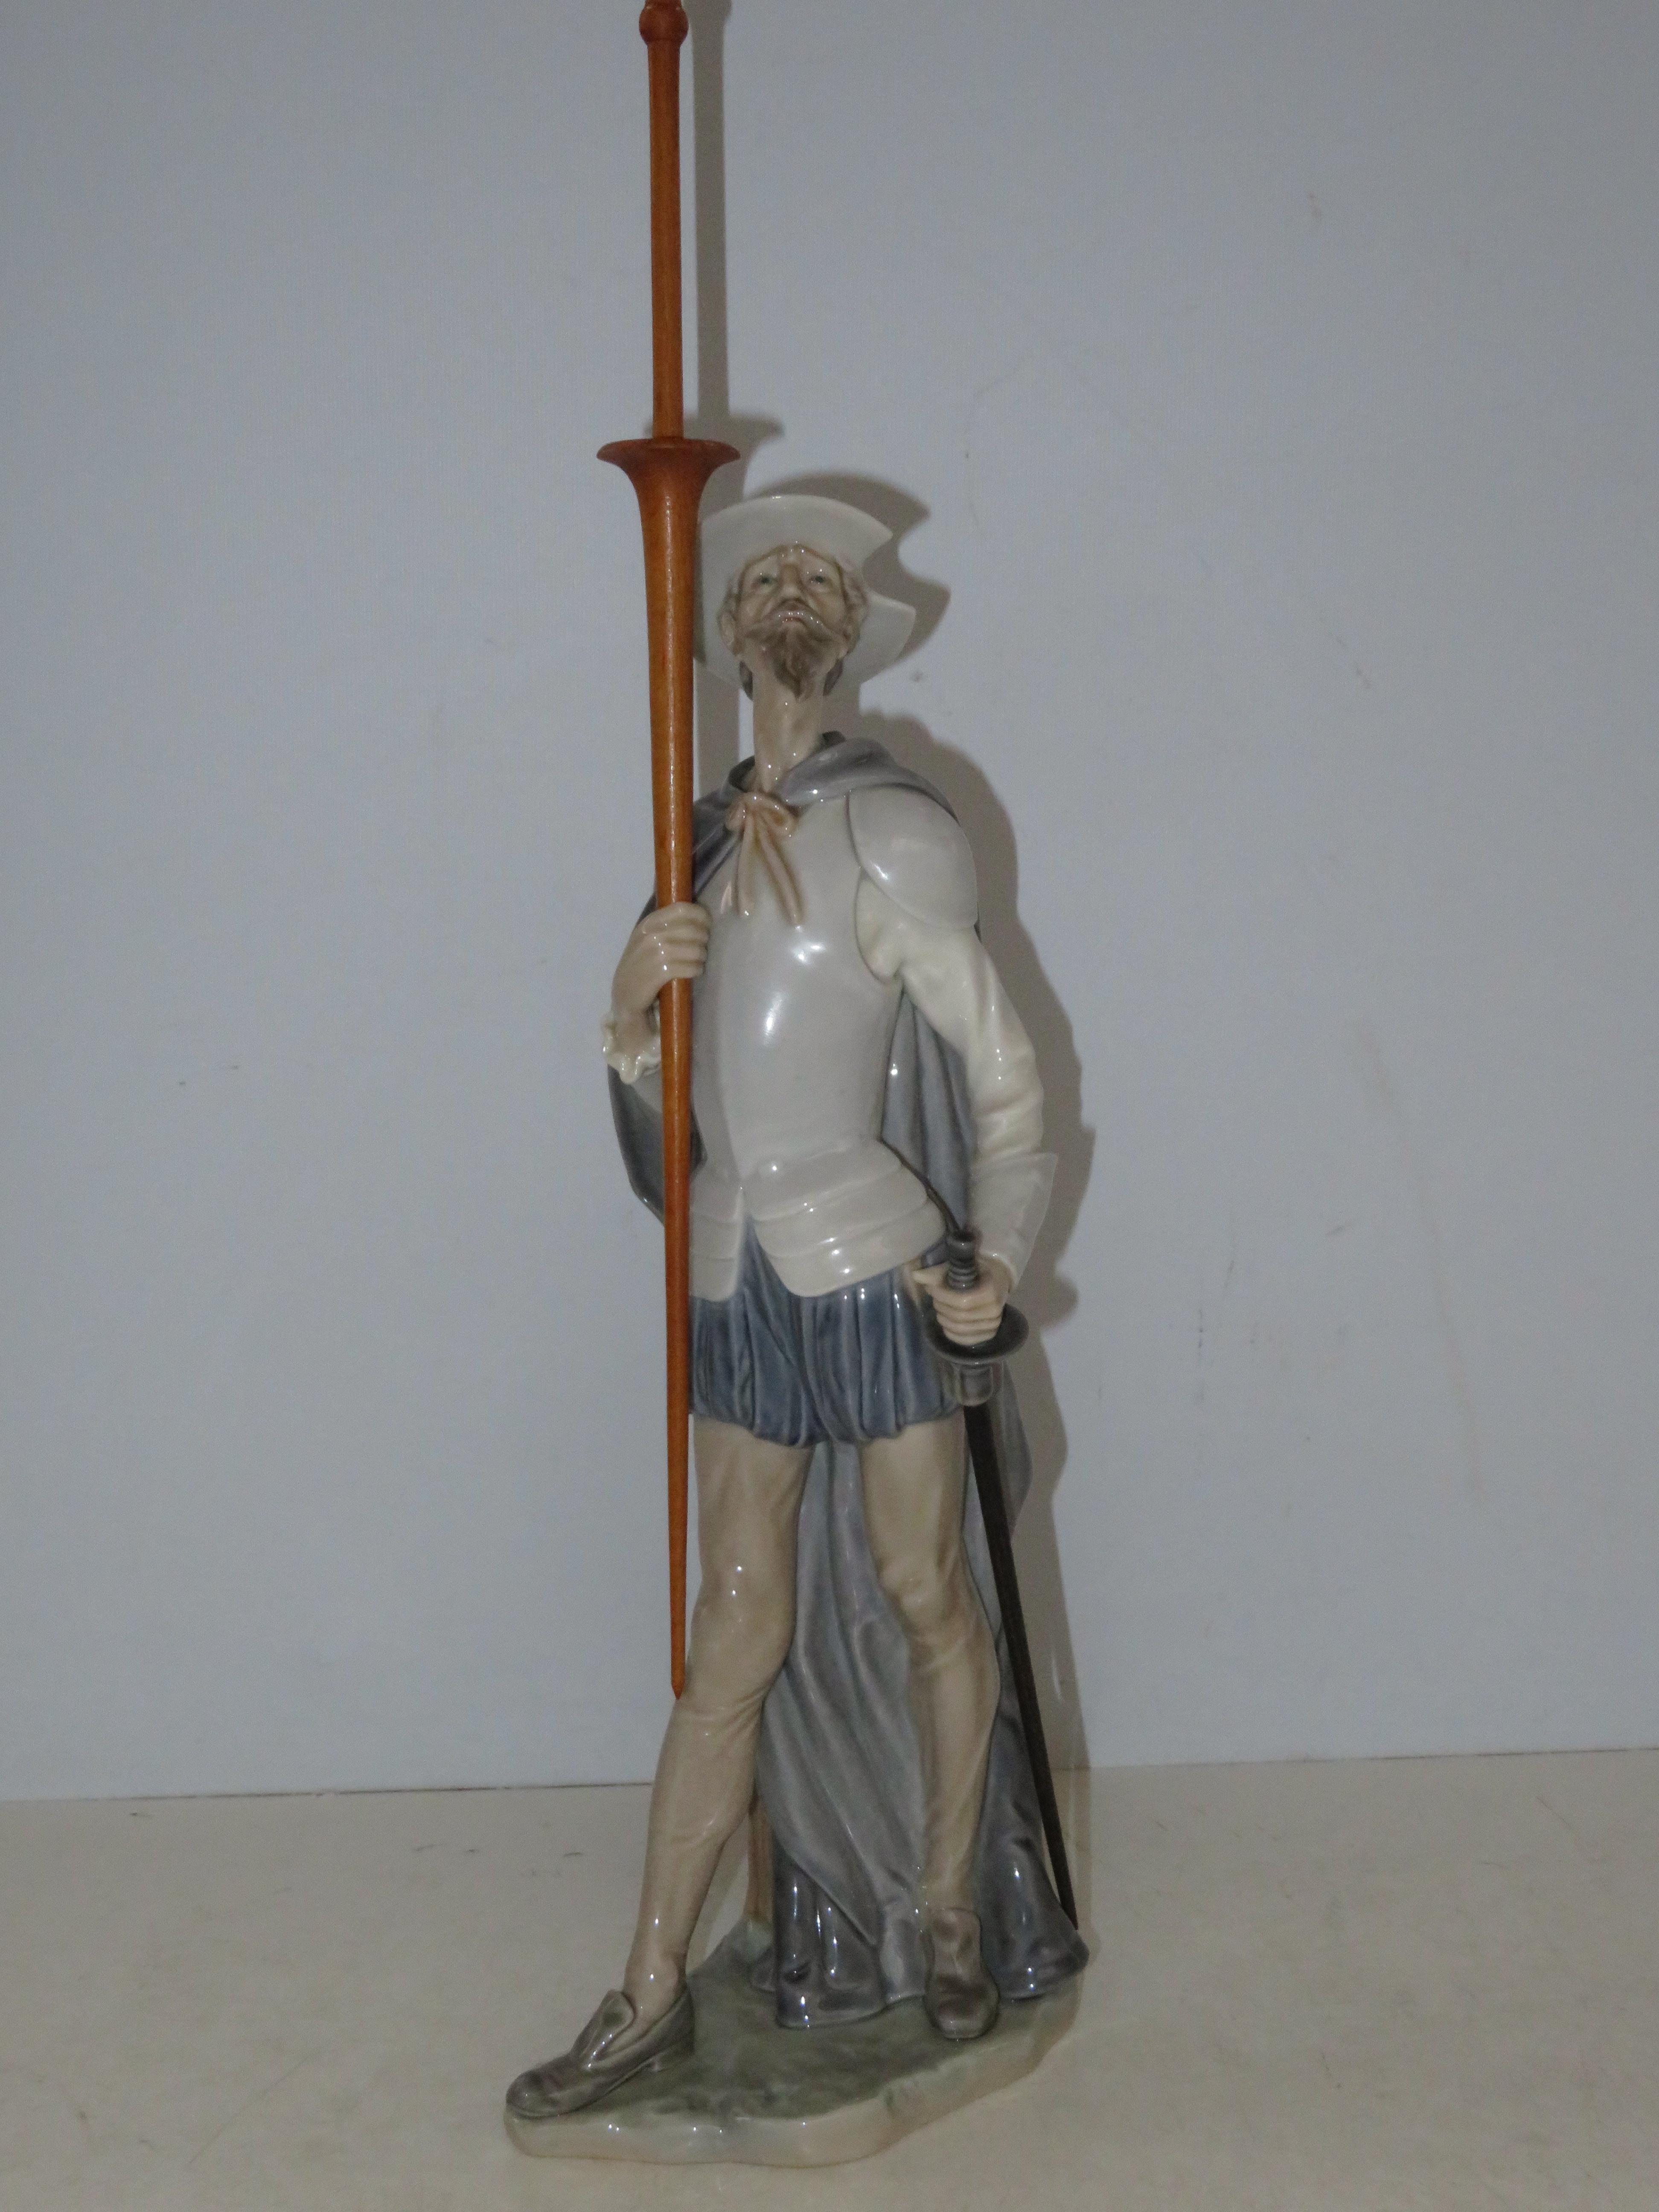 Large Lladro figure of Don Quixote holding a sword